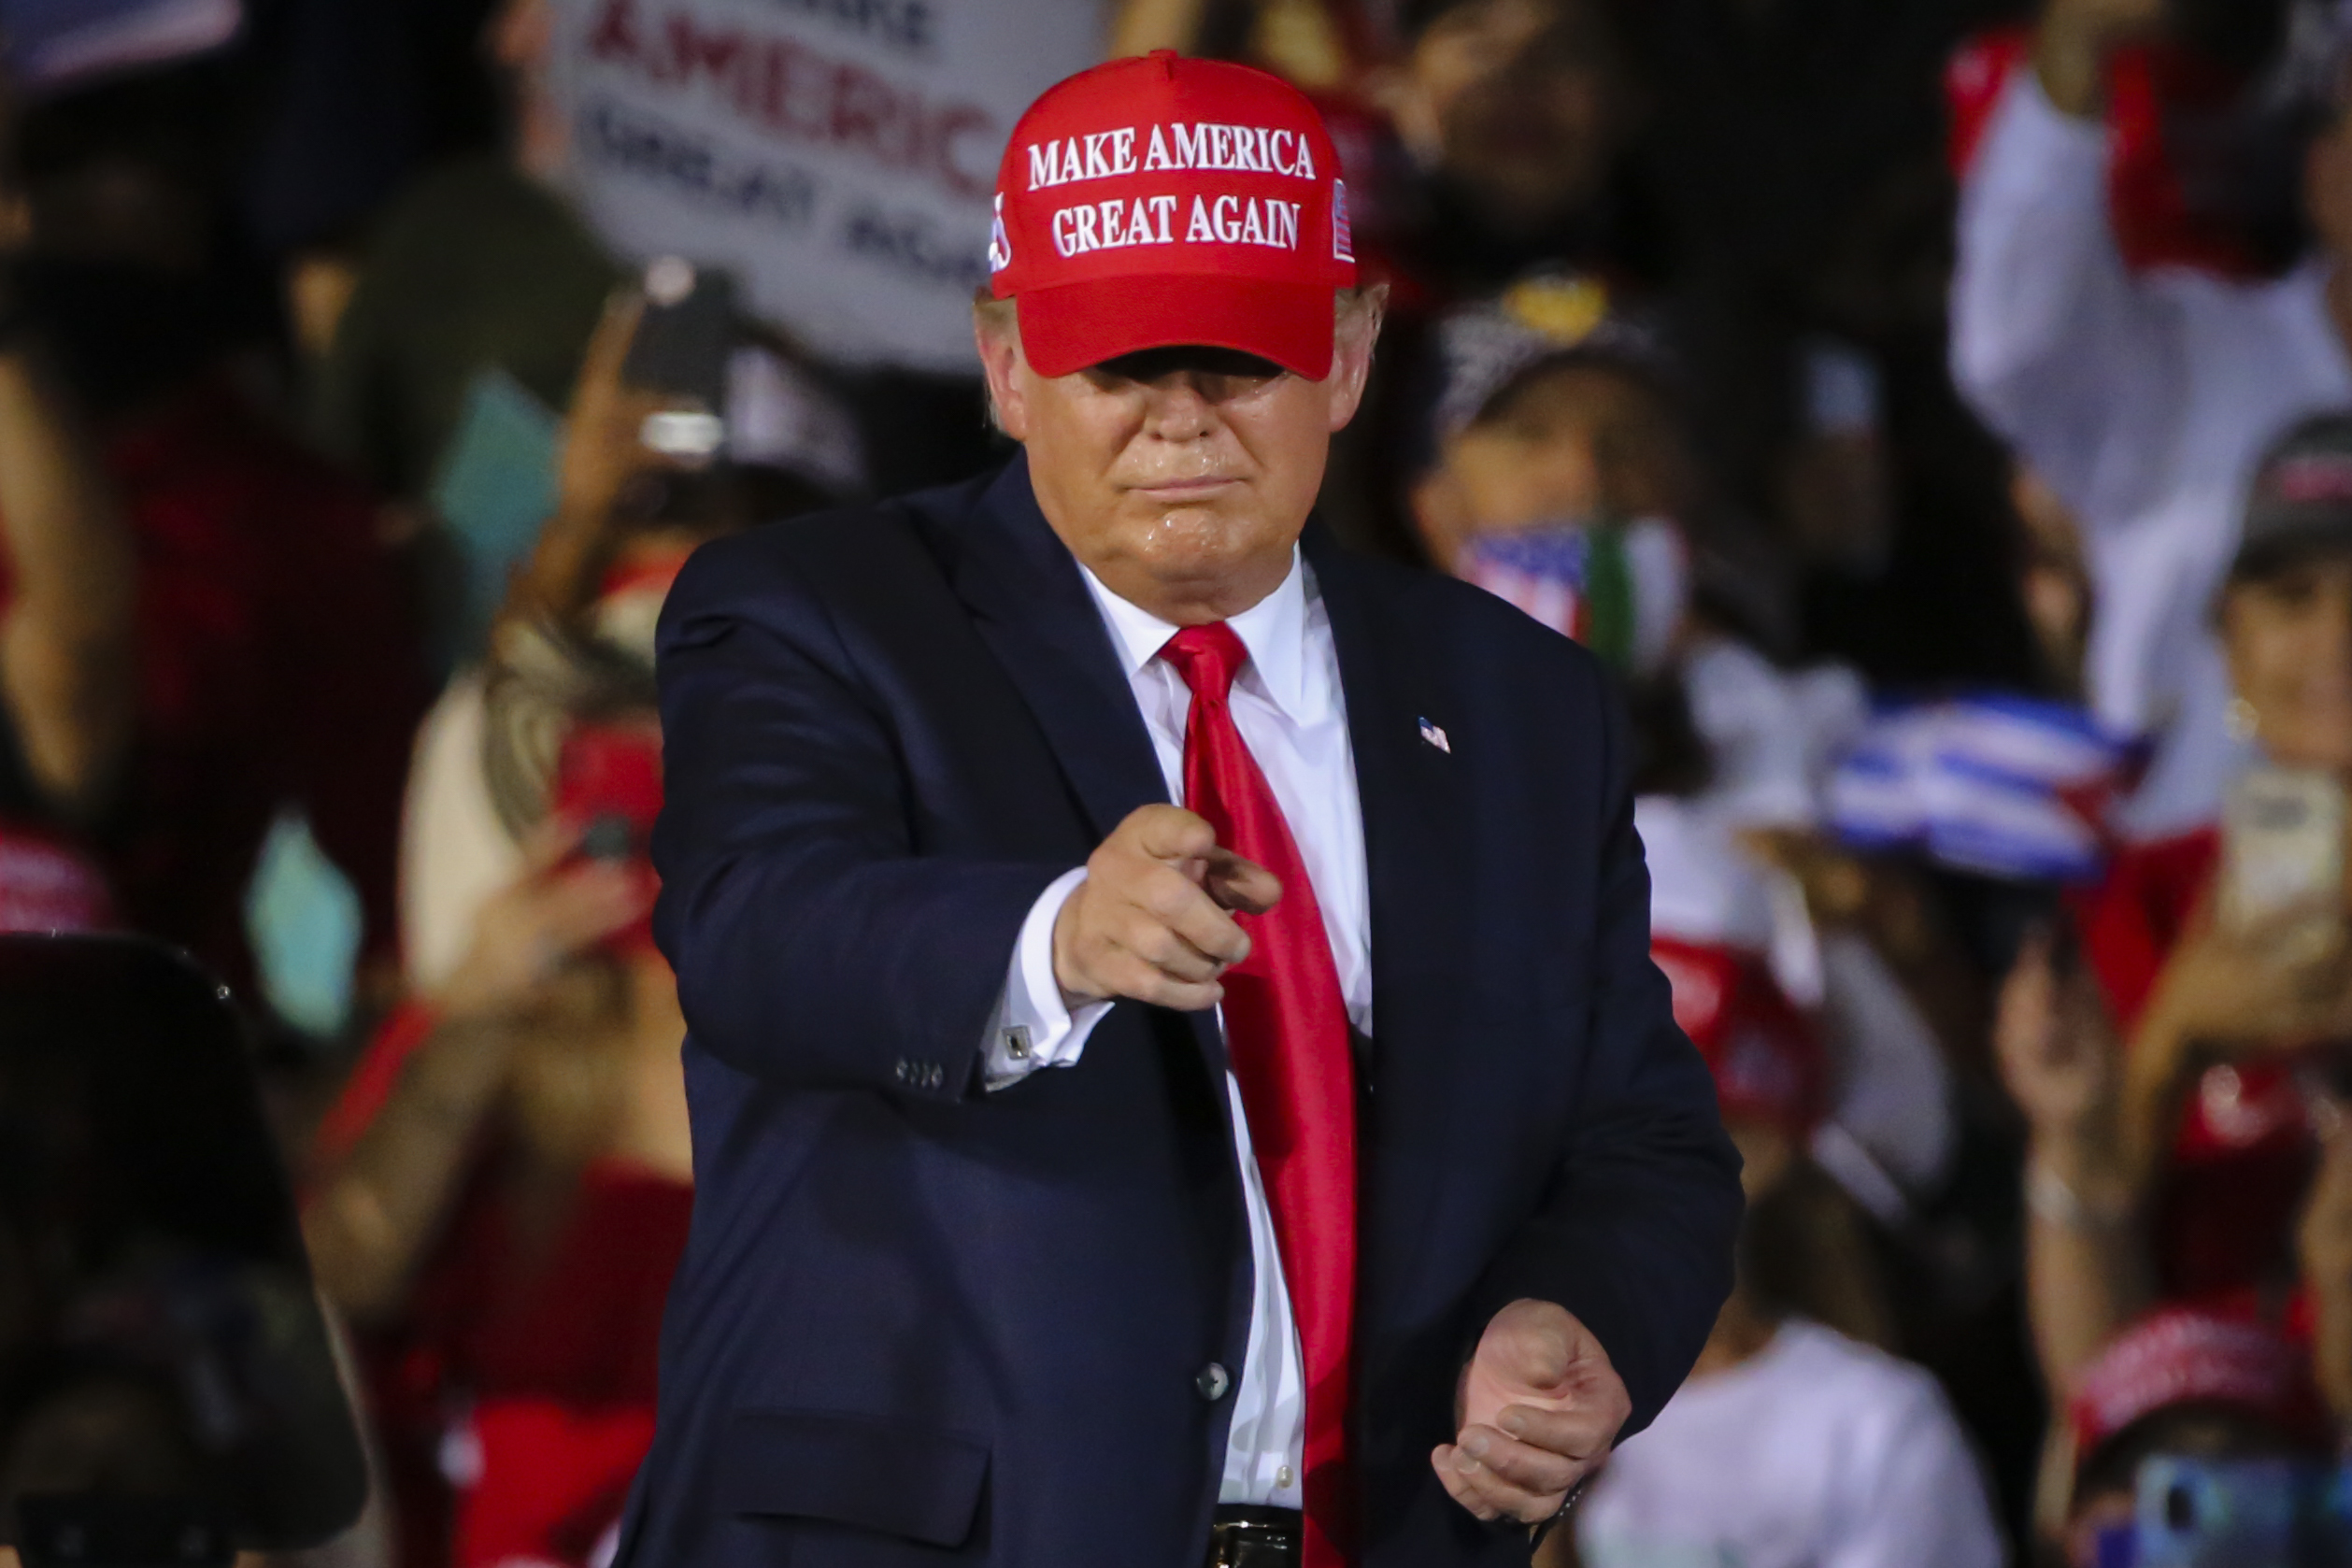 Donald Trump at a rally wearing a “Make America Great Again” hat.